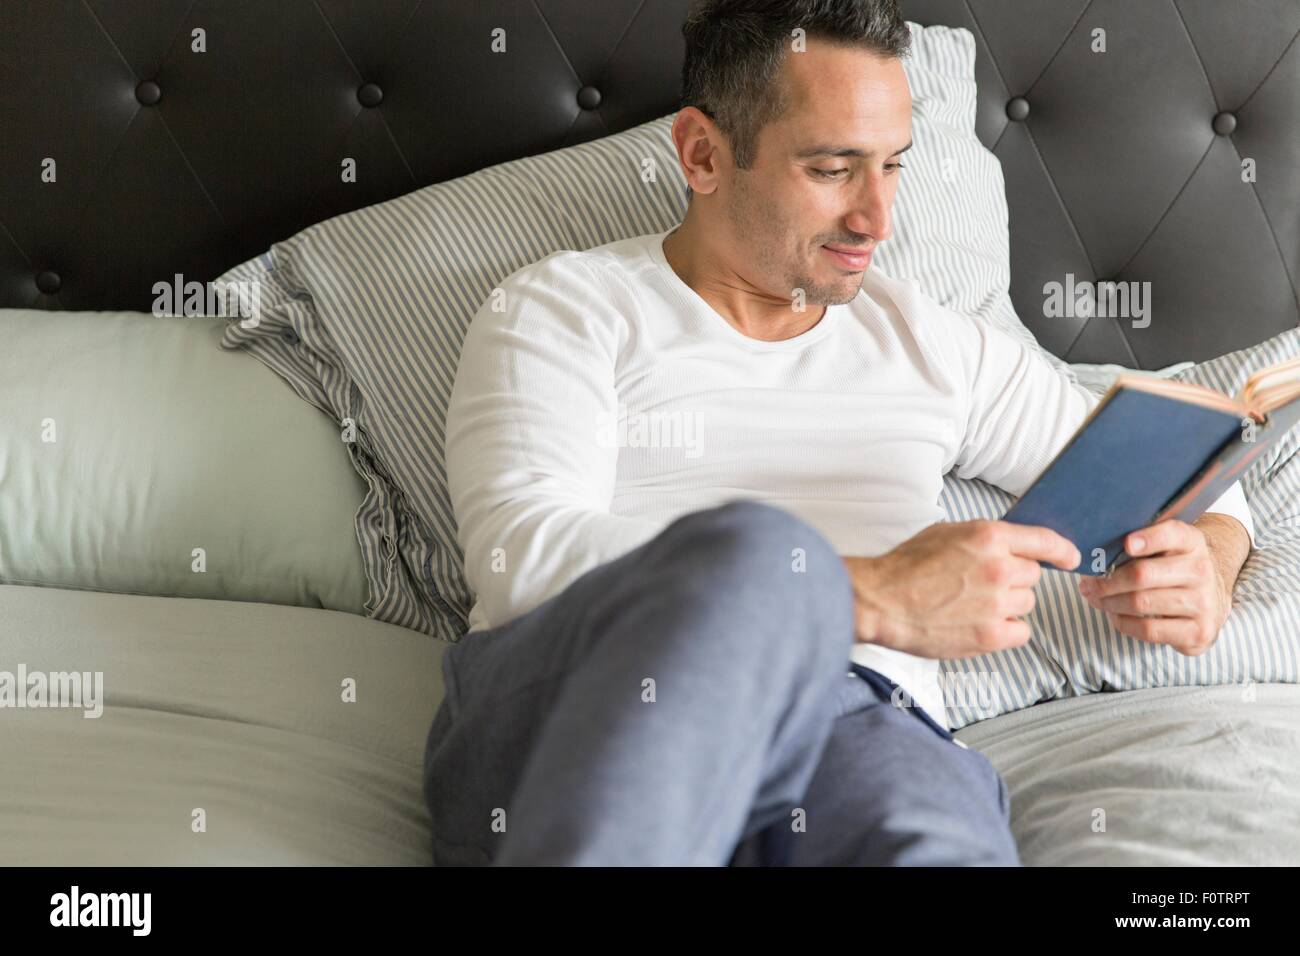 Mid adult man, relaxing on bed, reading book Stock Photo